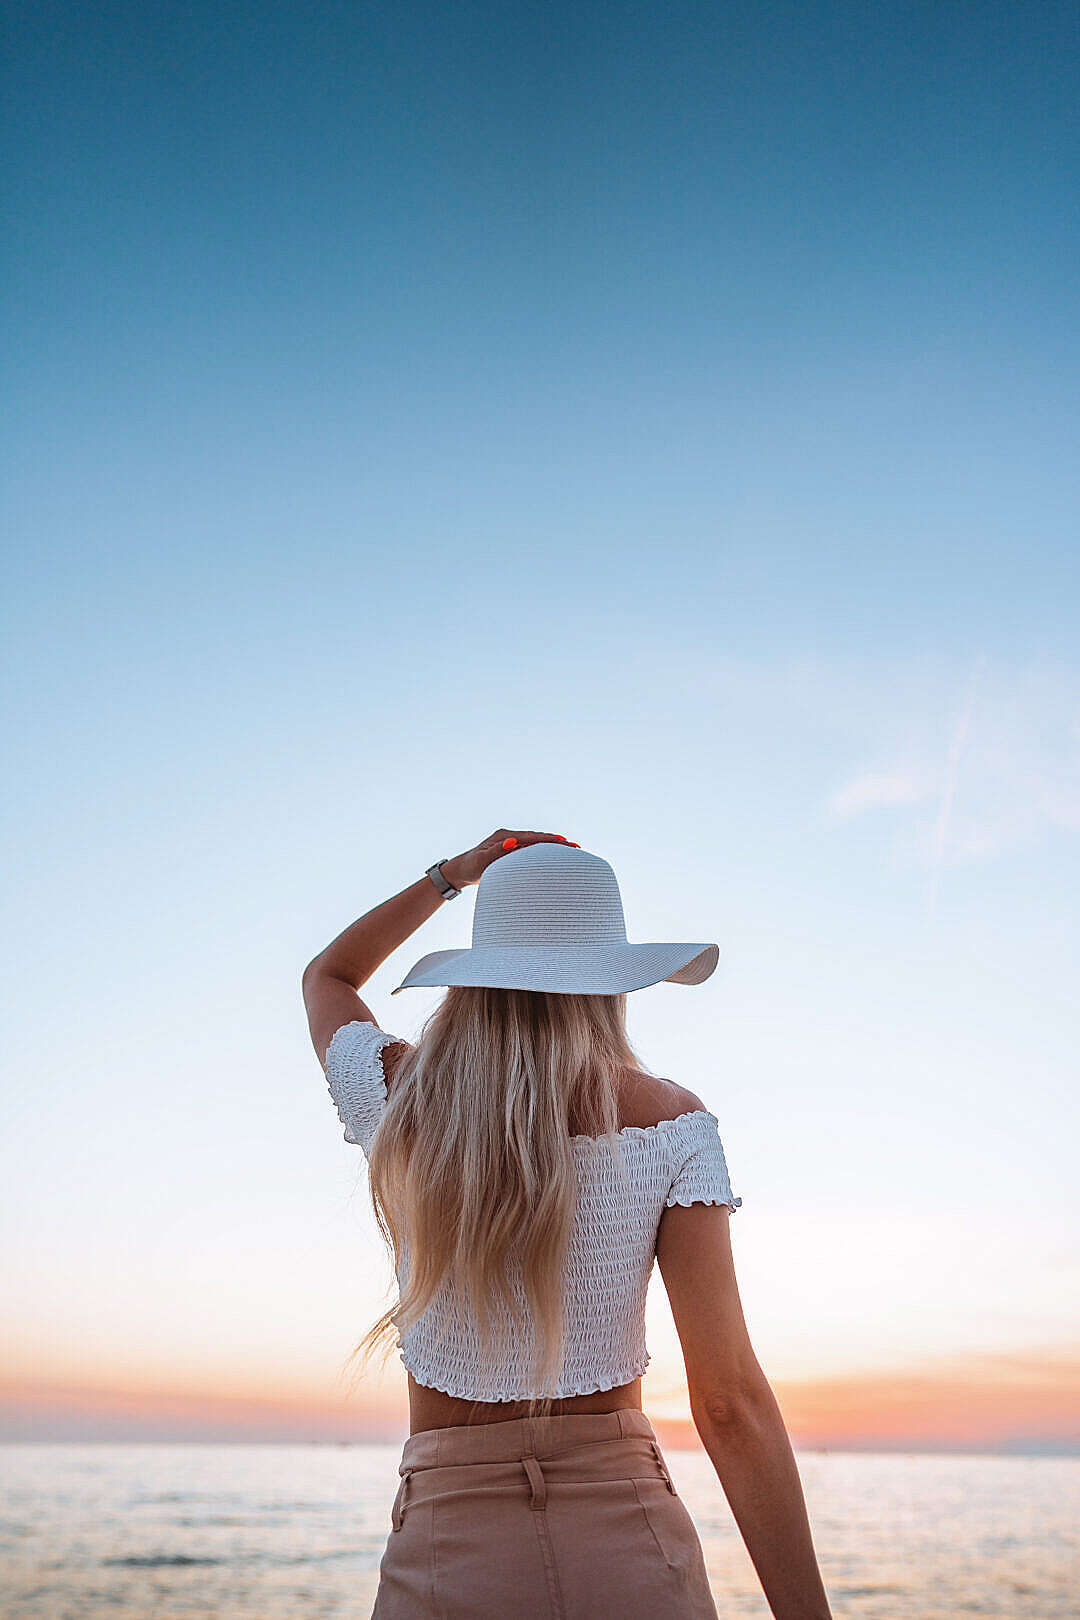 Download Beautiful Woman in a Hat Enjoying Sunset by the Sea FREE Stock Photo